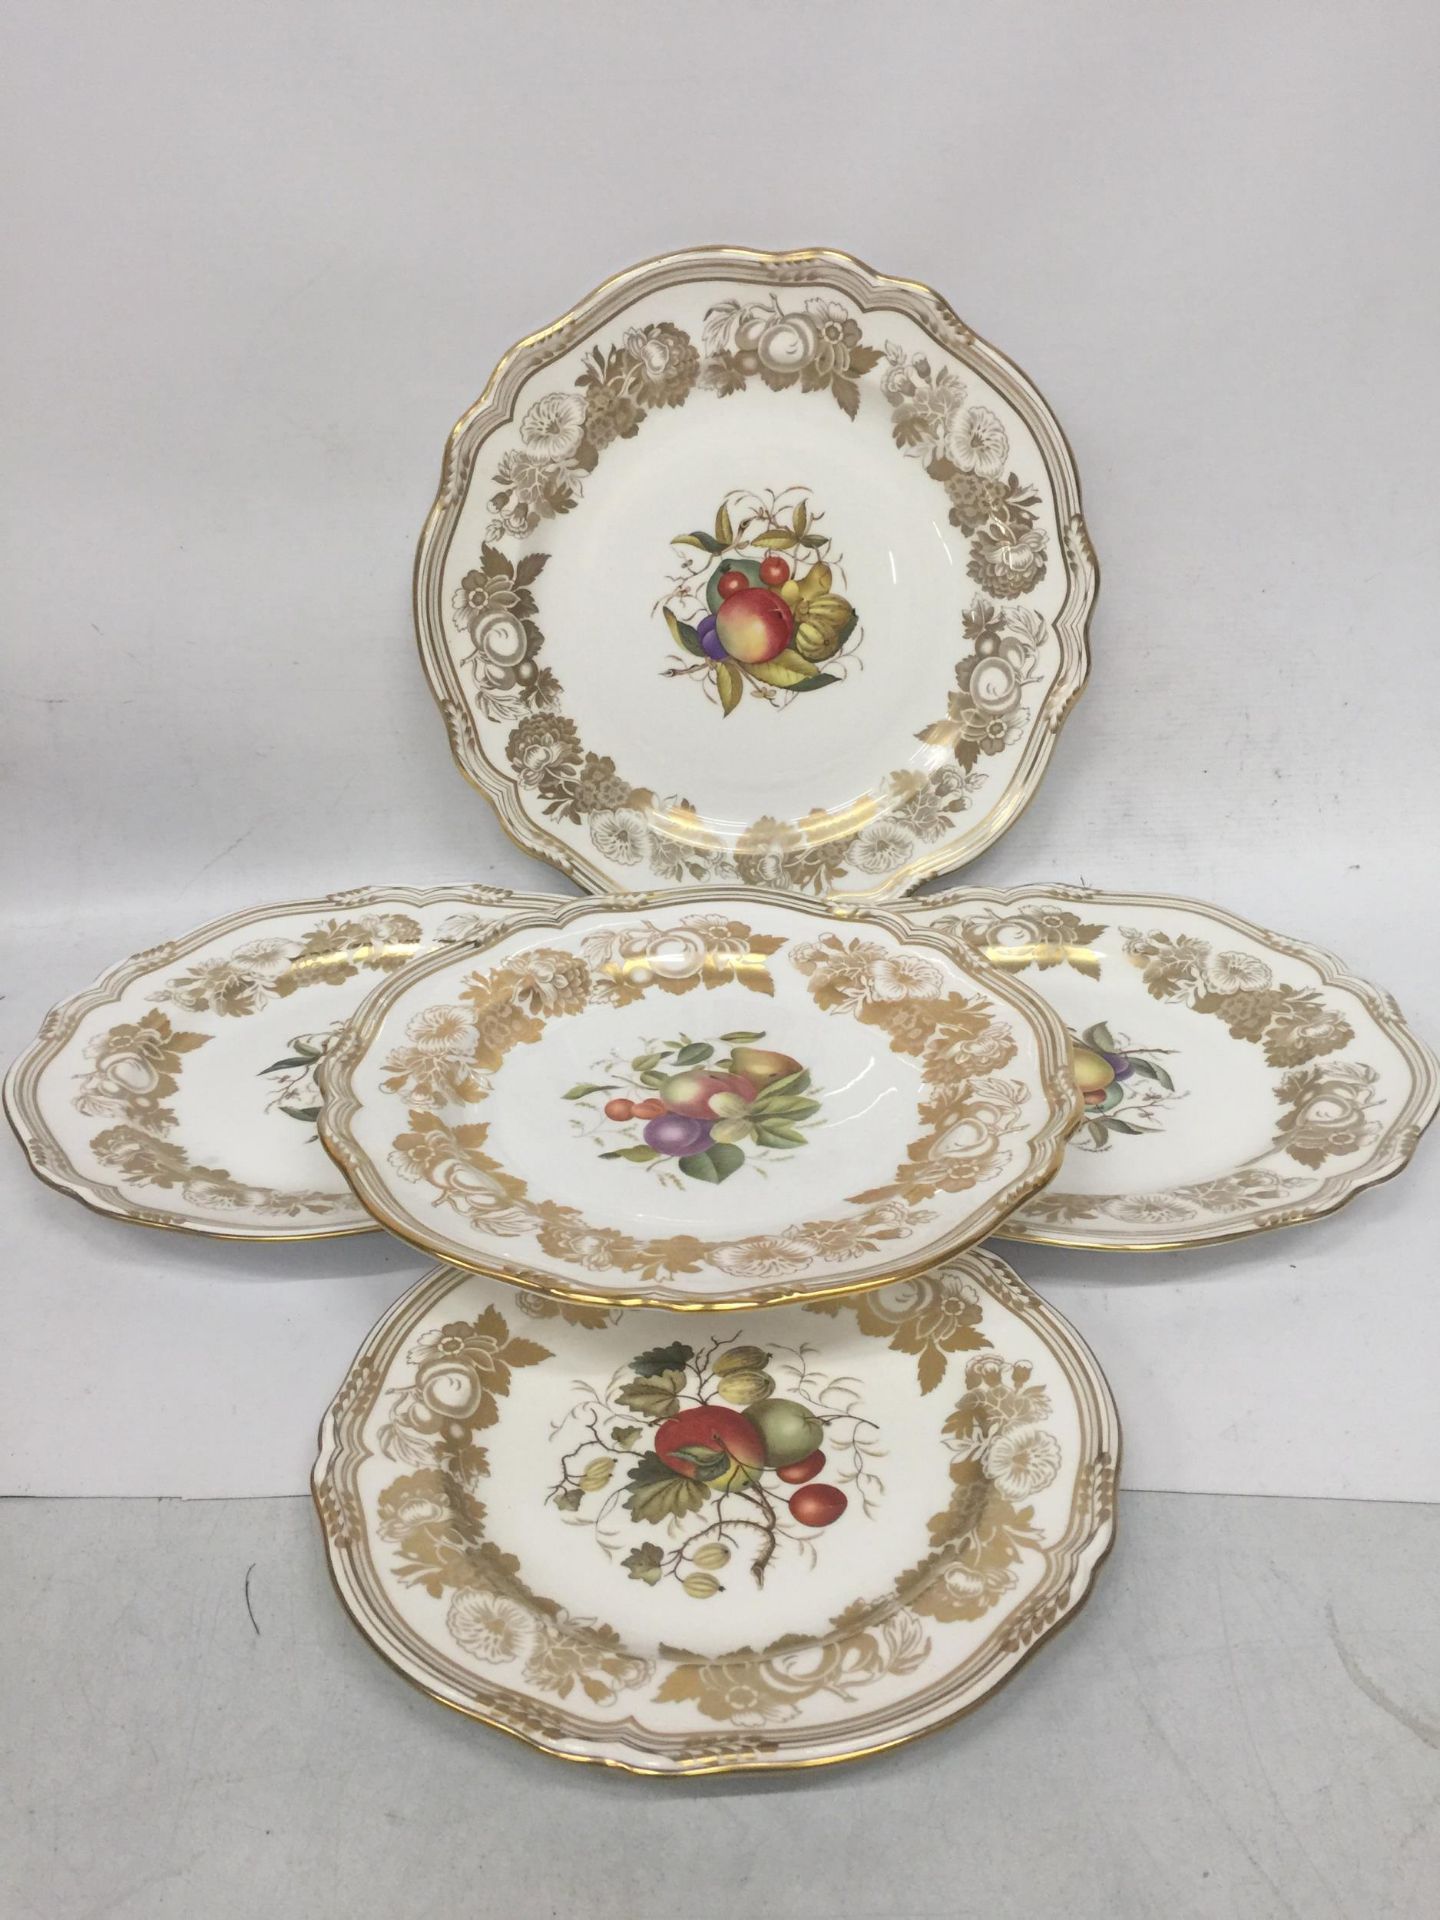 A SET OF FIVE SPODE GOLDEN VALLEY PATTERN CABINET PLATES